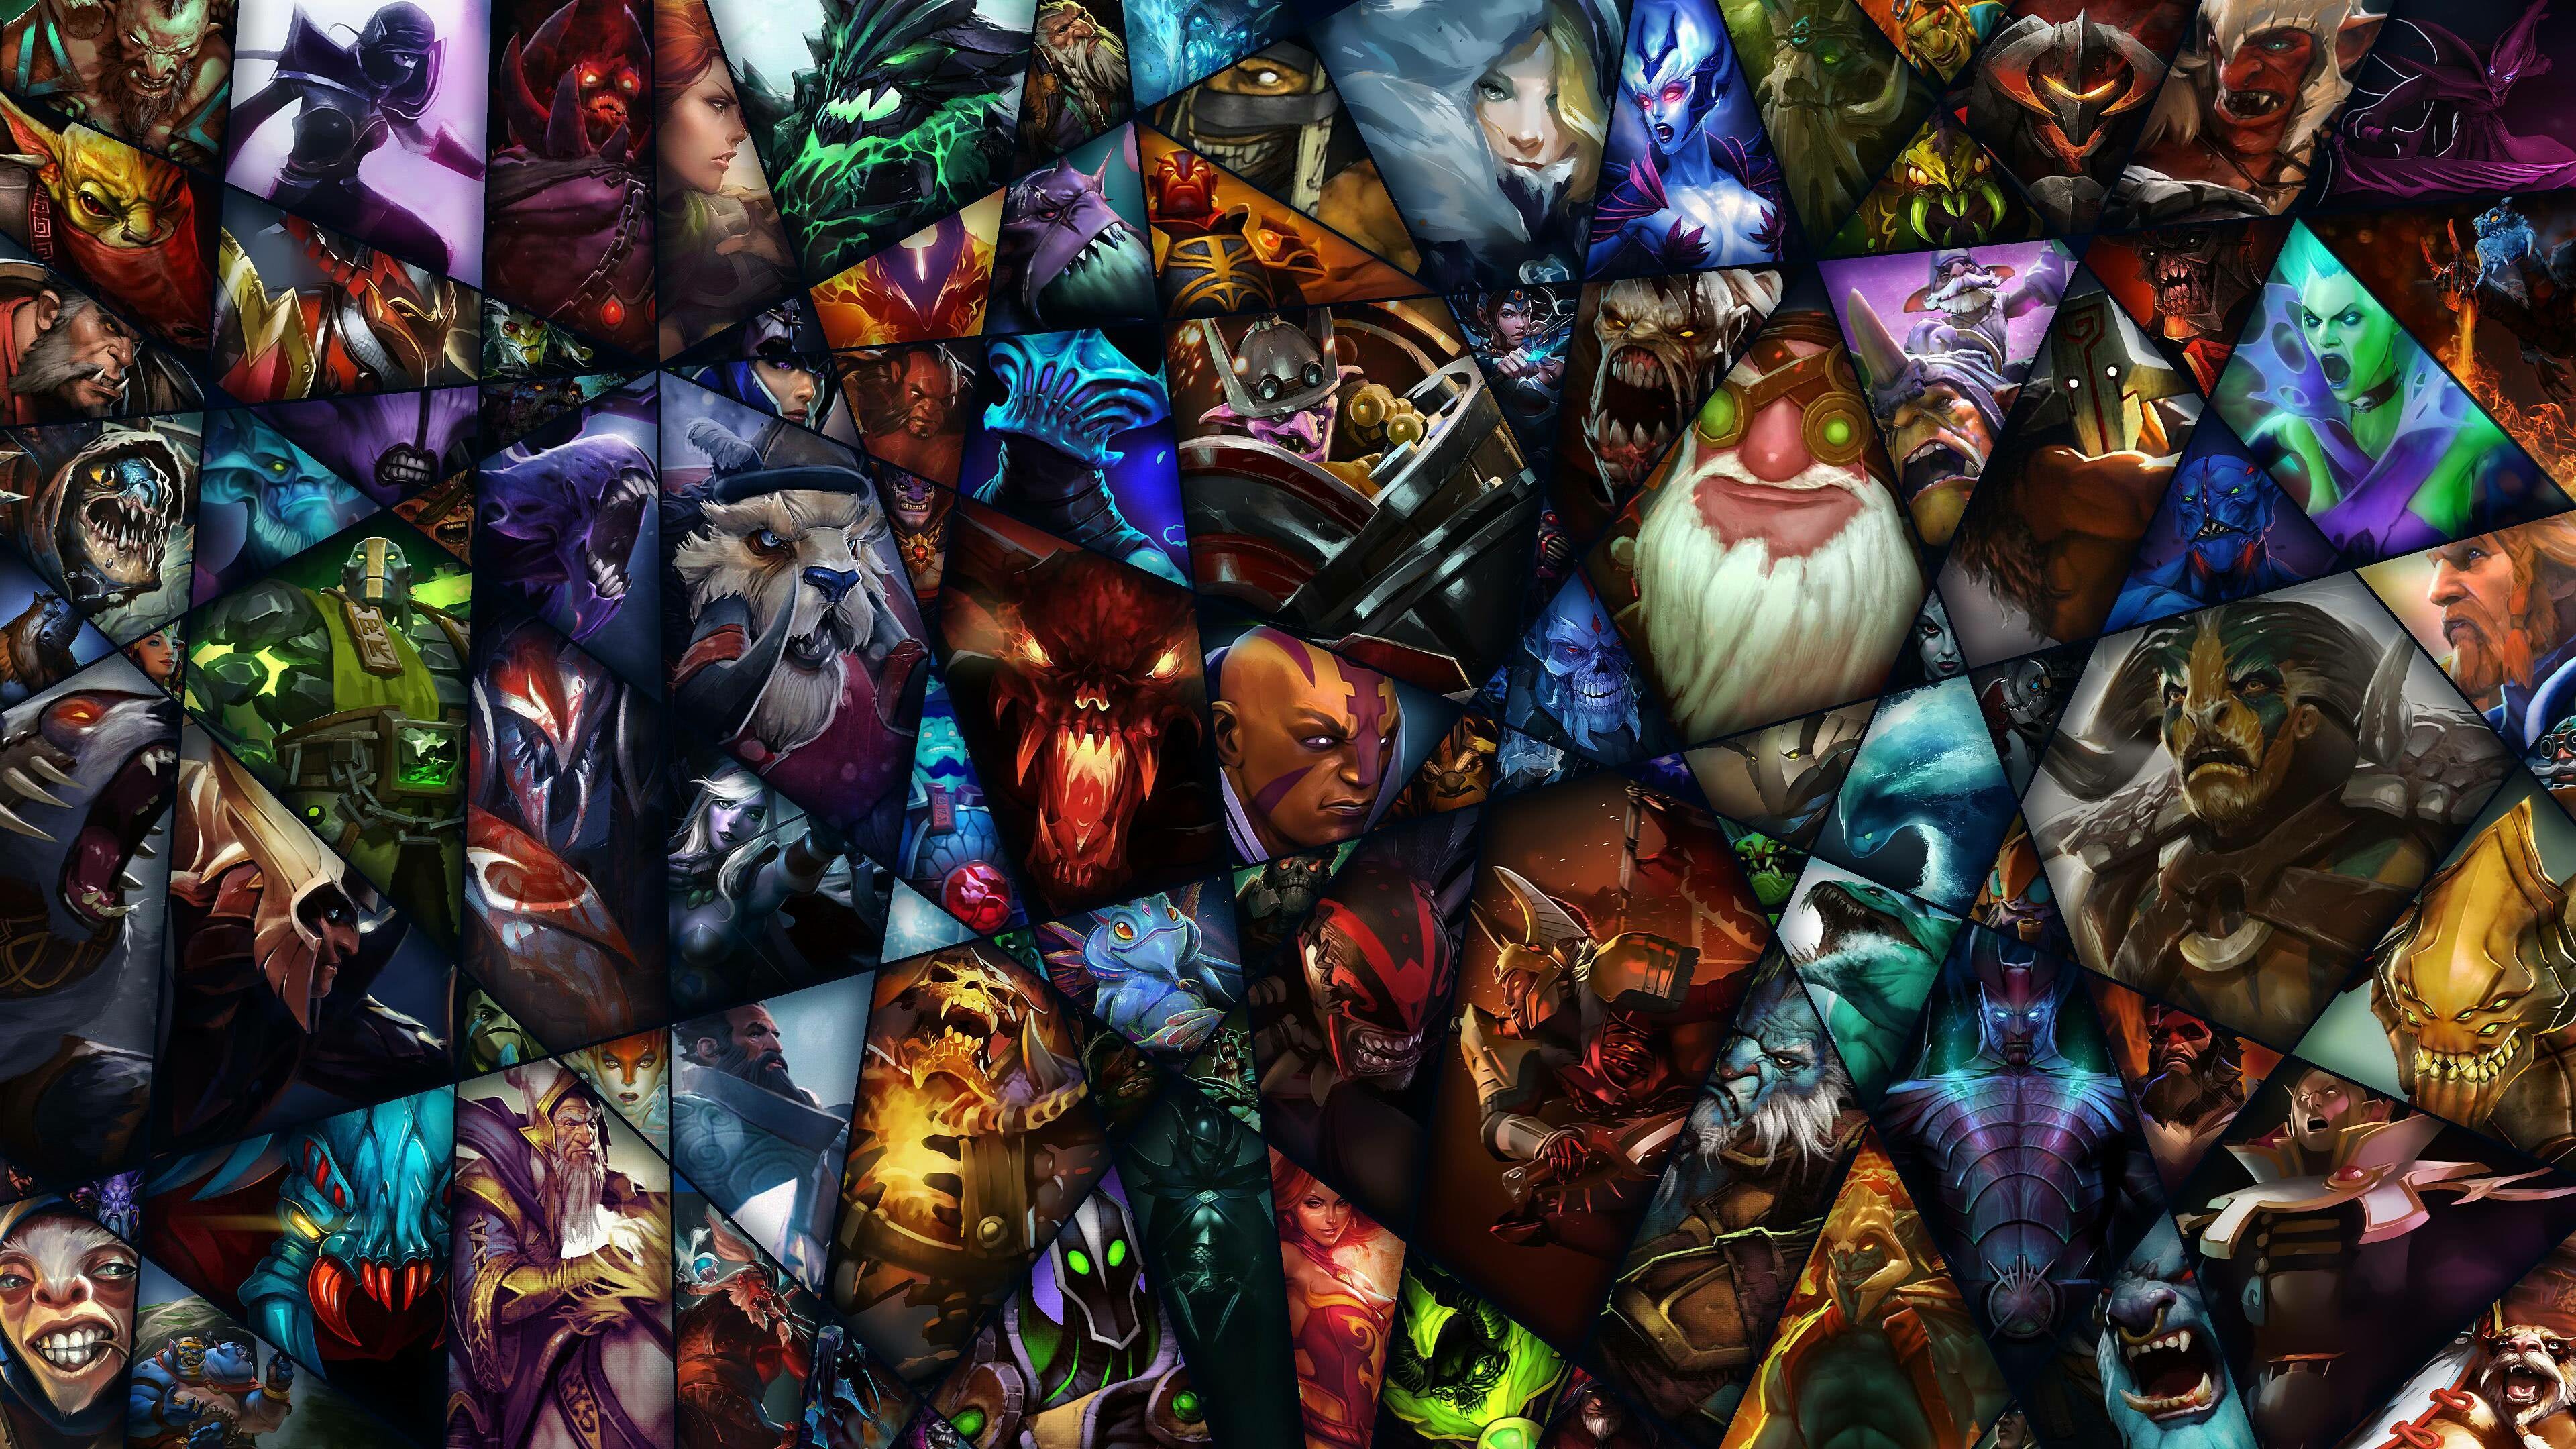 Dota 2: Ten players each control one of the game's 123 playable characters. 3840x2160 4K Wallpaper.